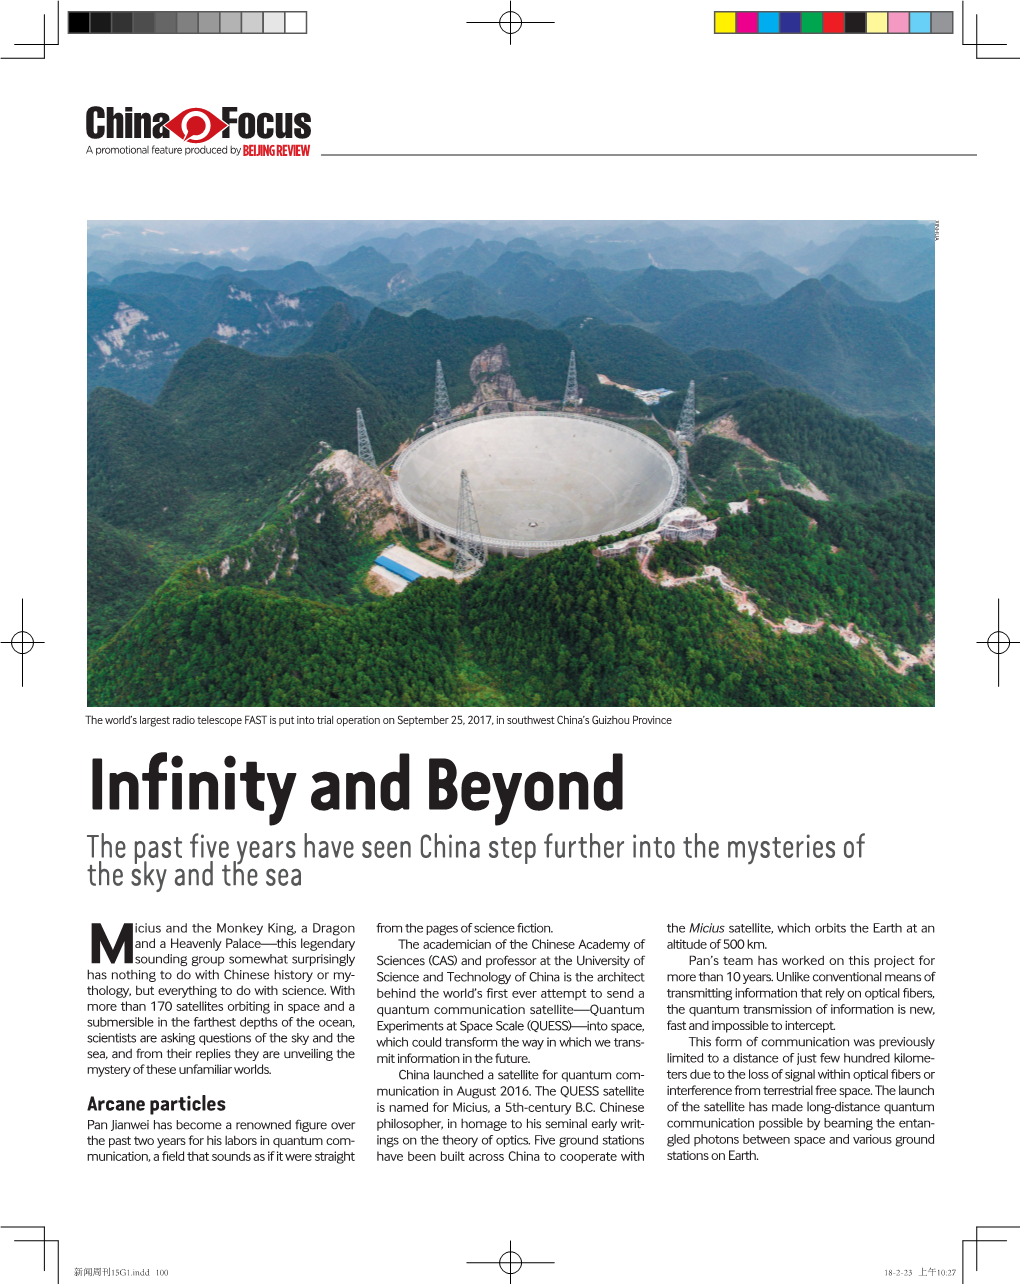 Infinity and Beyond the Past Five Years Have Seen China Step Further Into the Mysteries of the Sky and the Sea